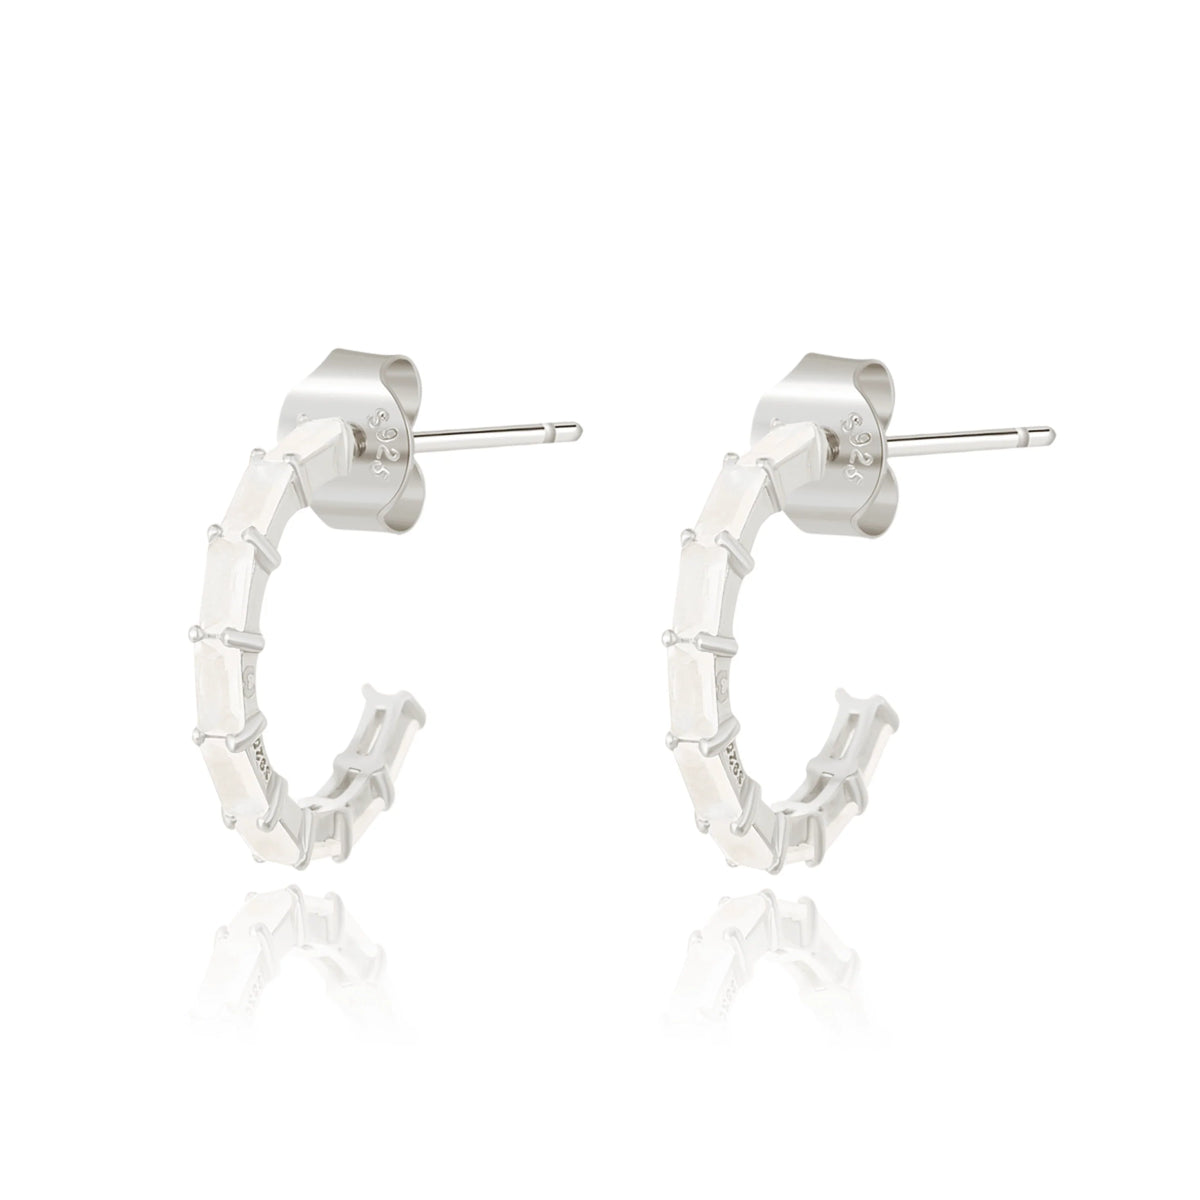 "Half Ring Clarion" Earrings - Milas Jewels Shop